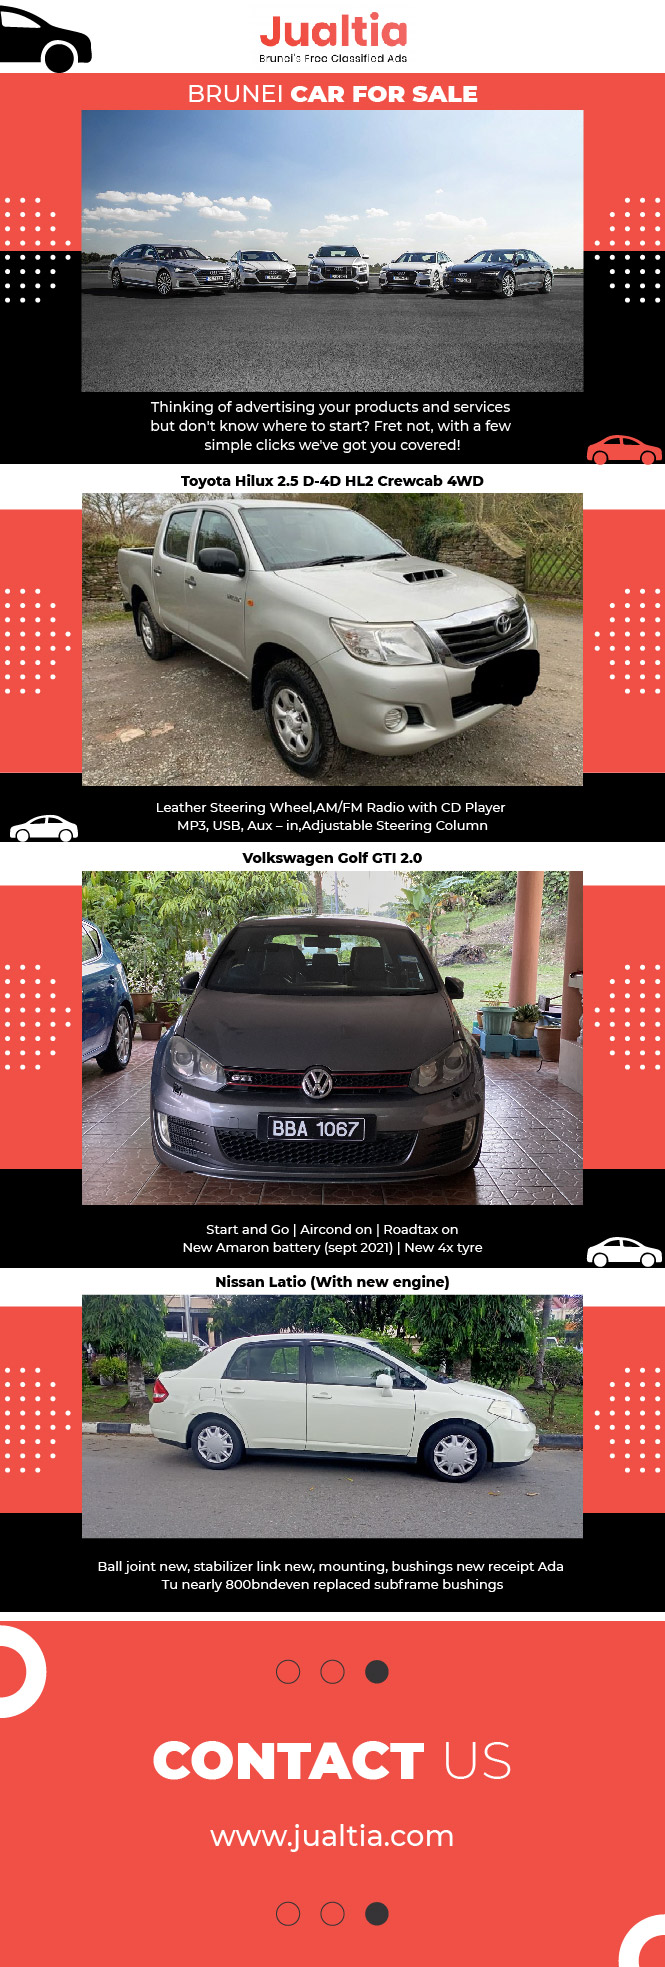 Find Brunei Used Cars for Sale – Jualtia